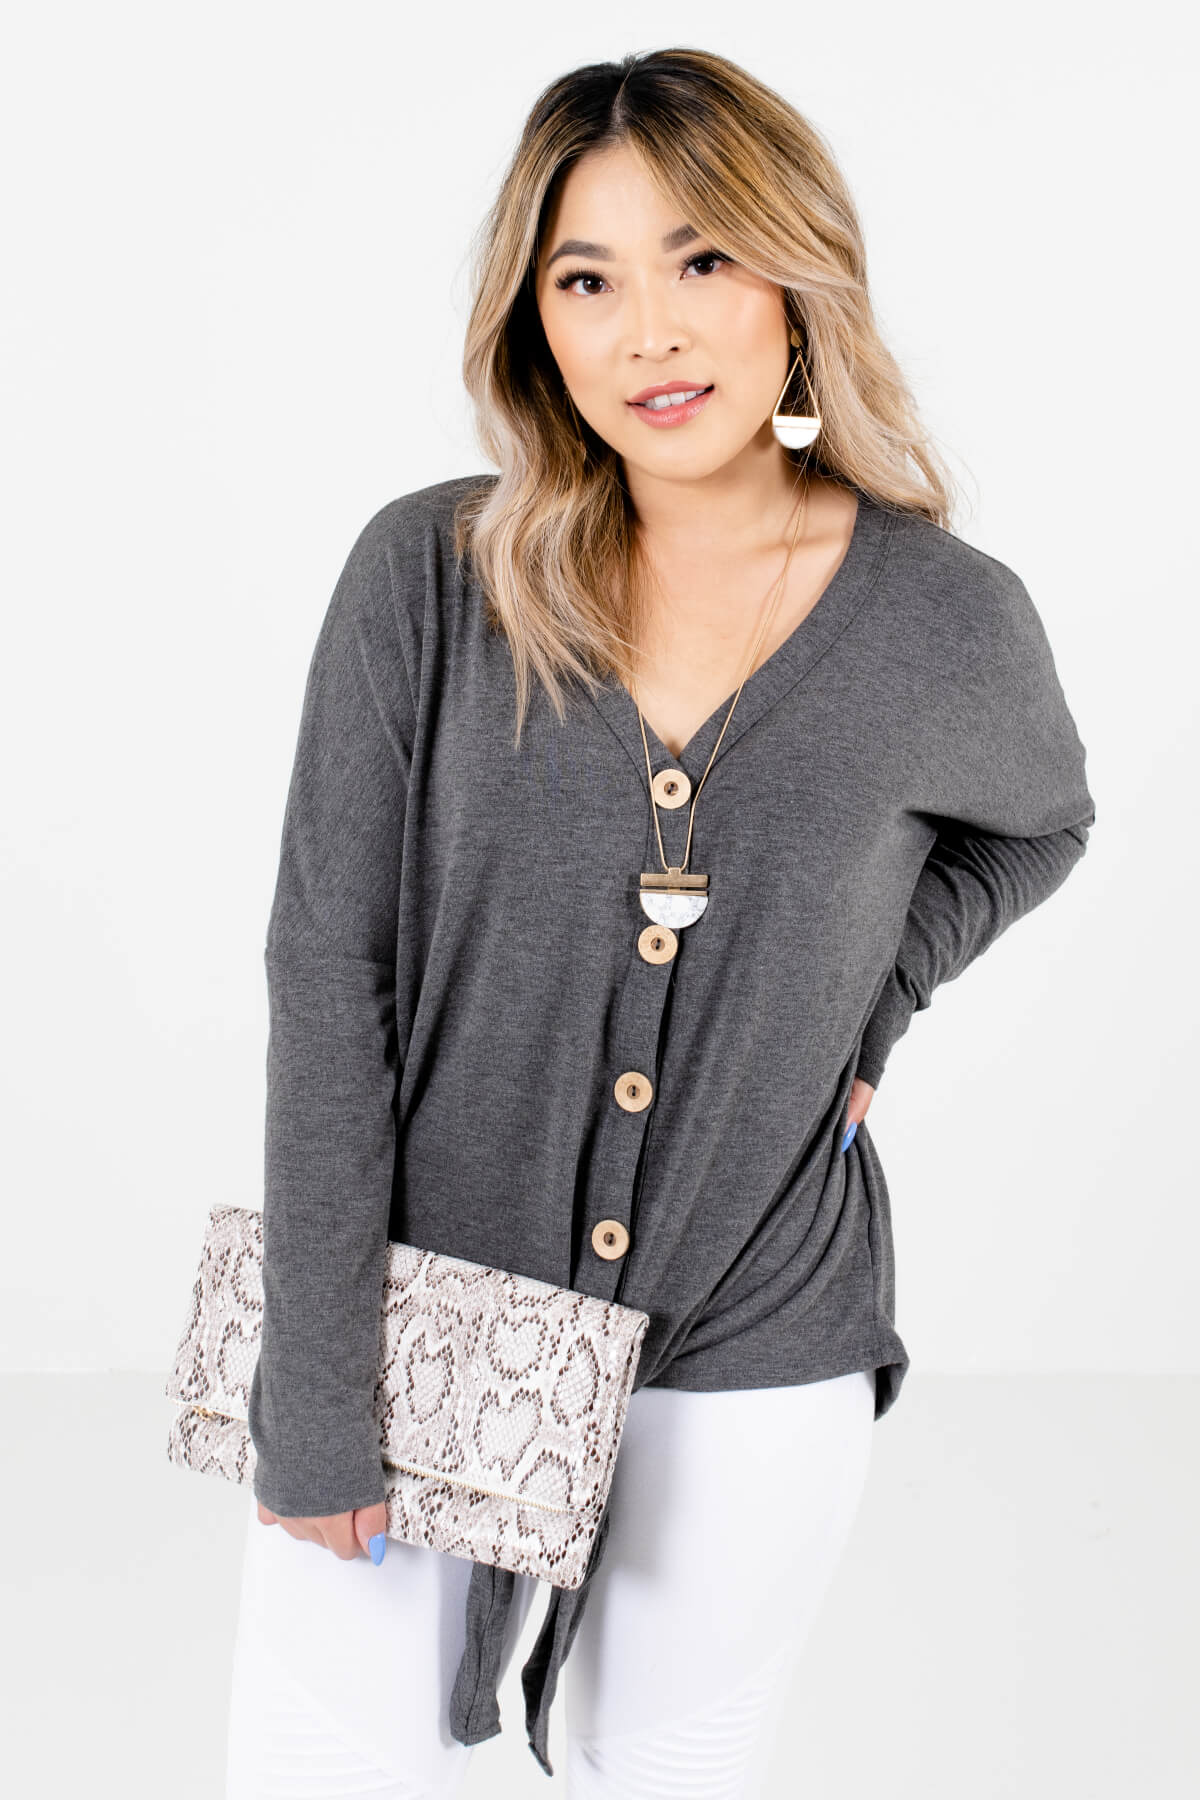 Charcoal Gray Cute and Comfortable Boutique Tops for Women